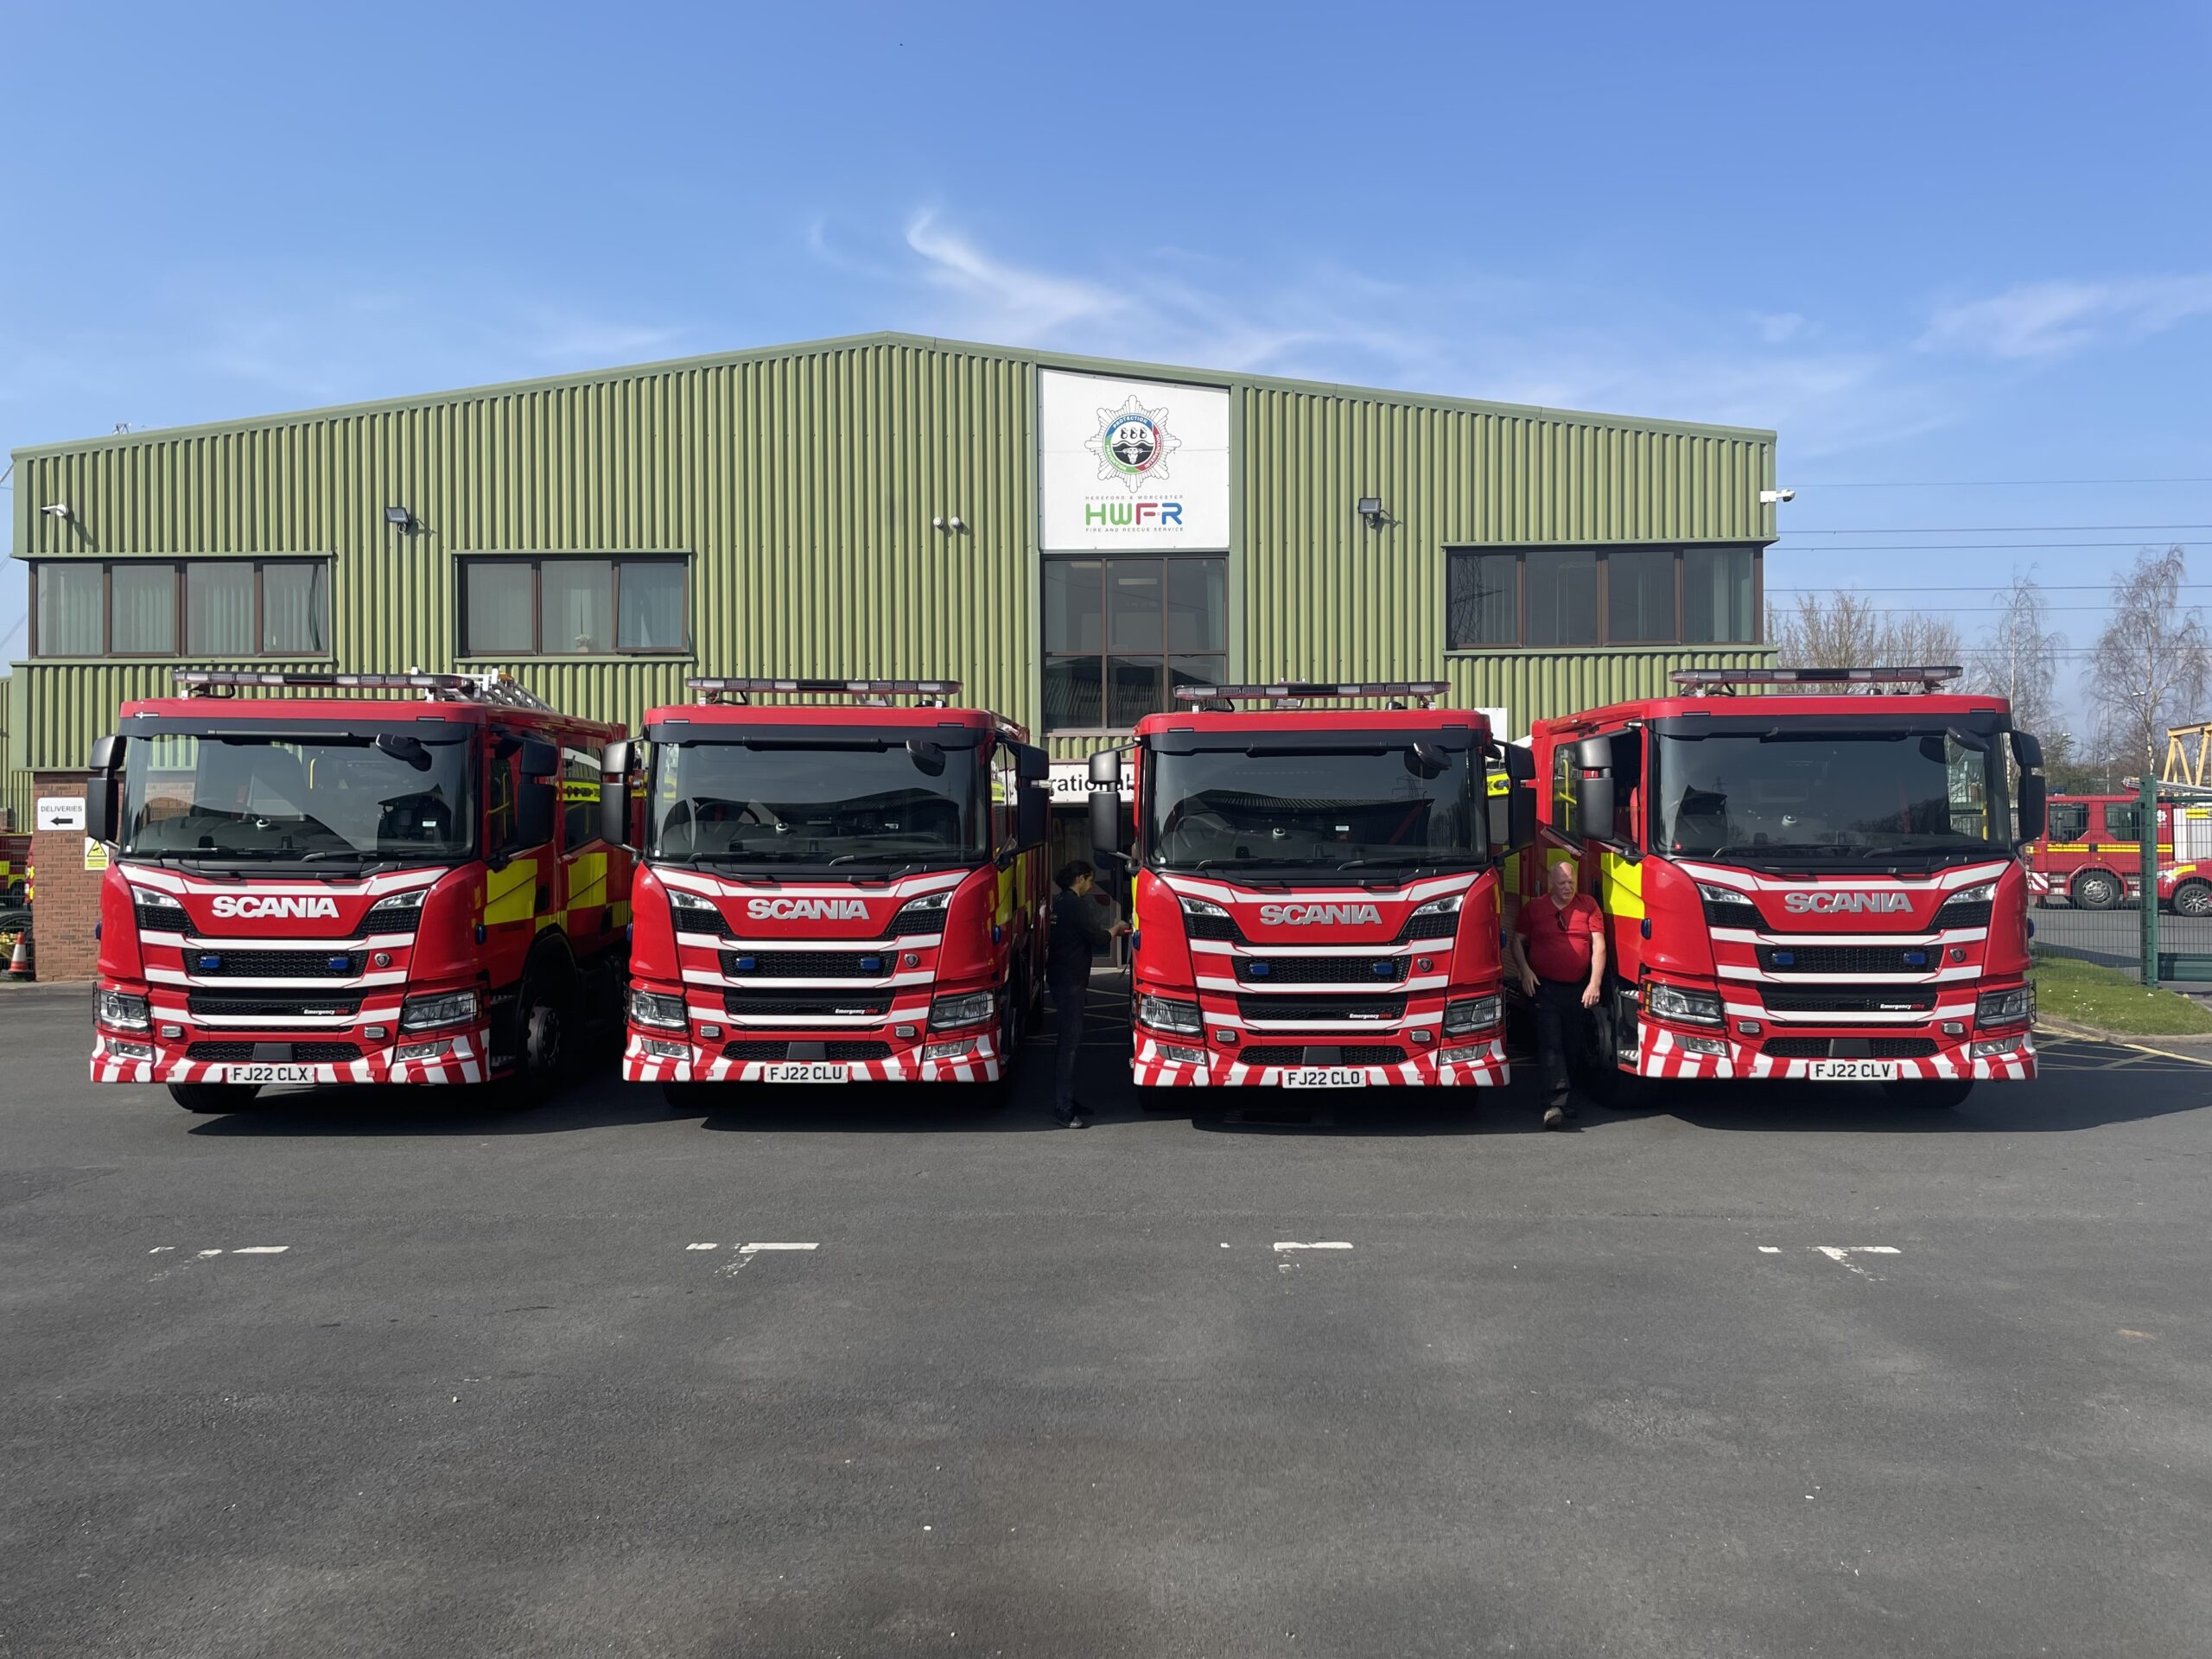 Animal rescue capability enhanced with arrival of new HWFRS appliances